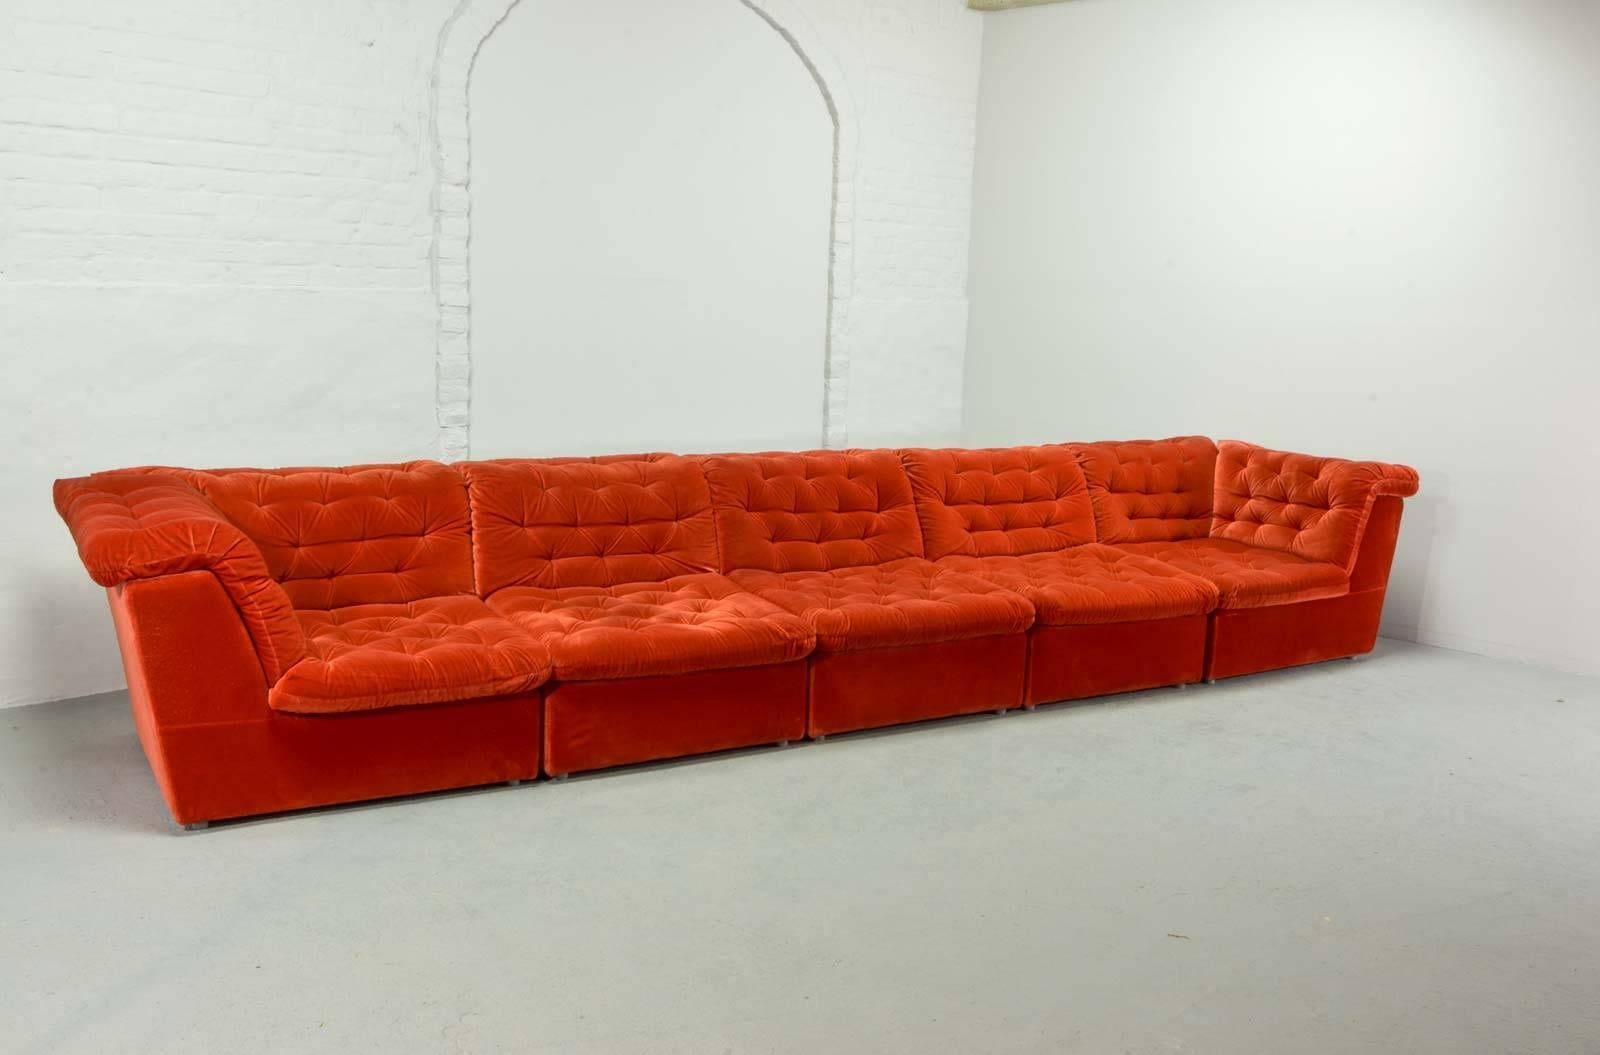 This stunning and very comfortable sofaset contains five elements and a separate lounge chair in a beautiful bright vermilion red colored velvet / velours upholstery. 
All elements are interchangeable, so there are numerous ways to put it. The set